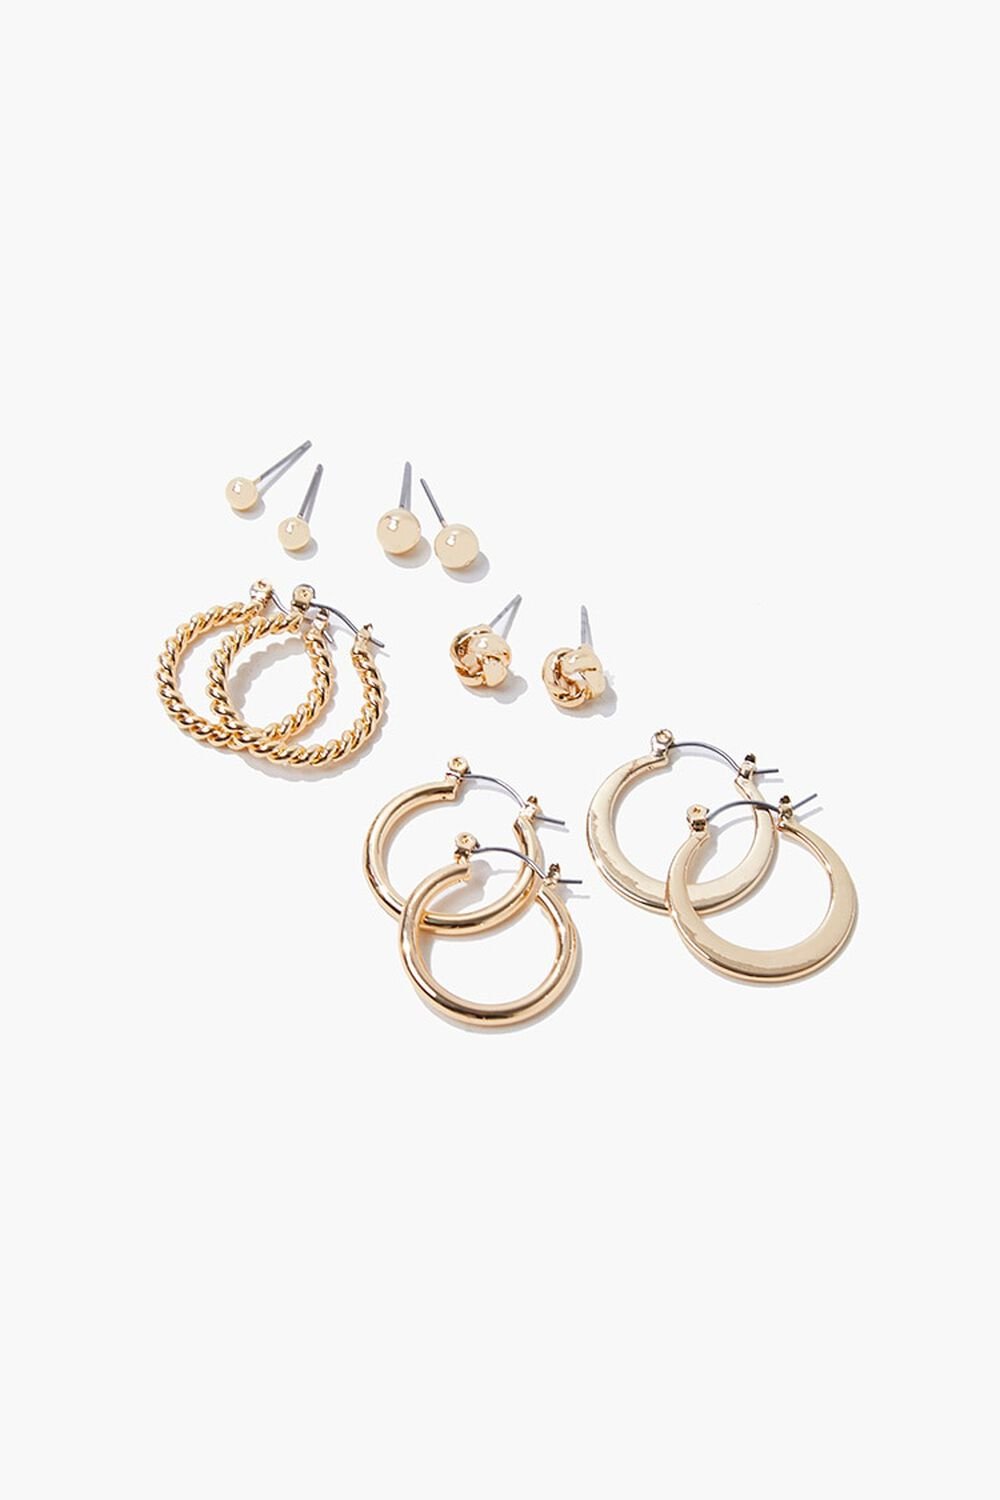 GOLD Upcycled Hoop & Stud Earring Set, image 1